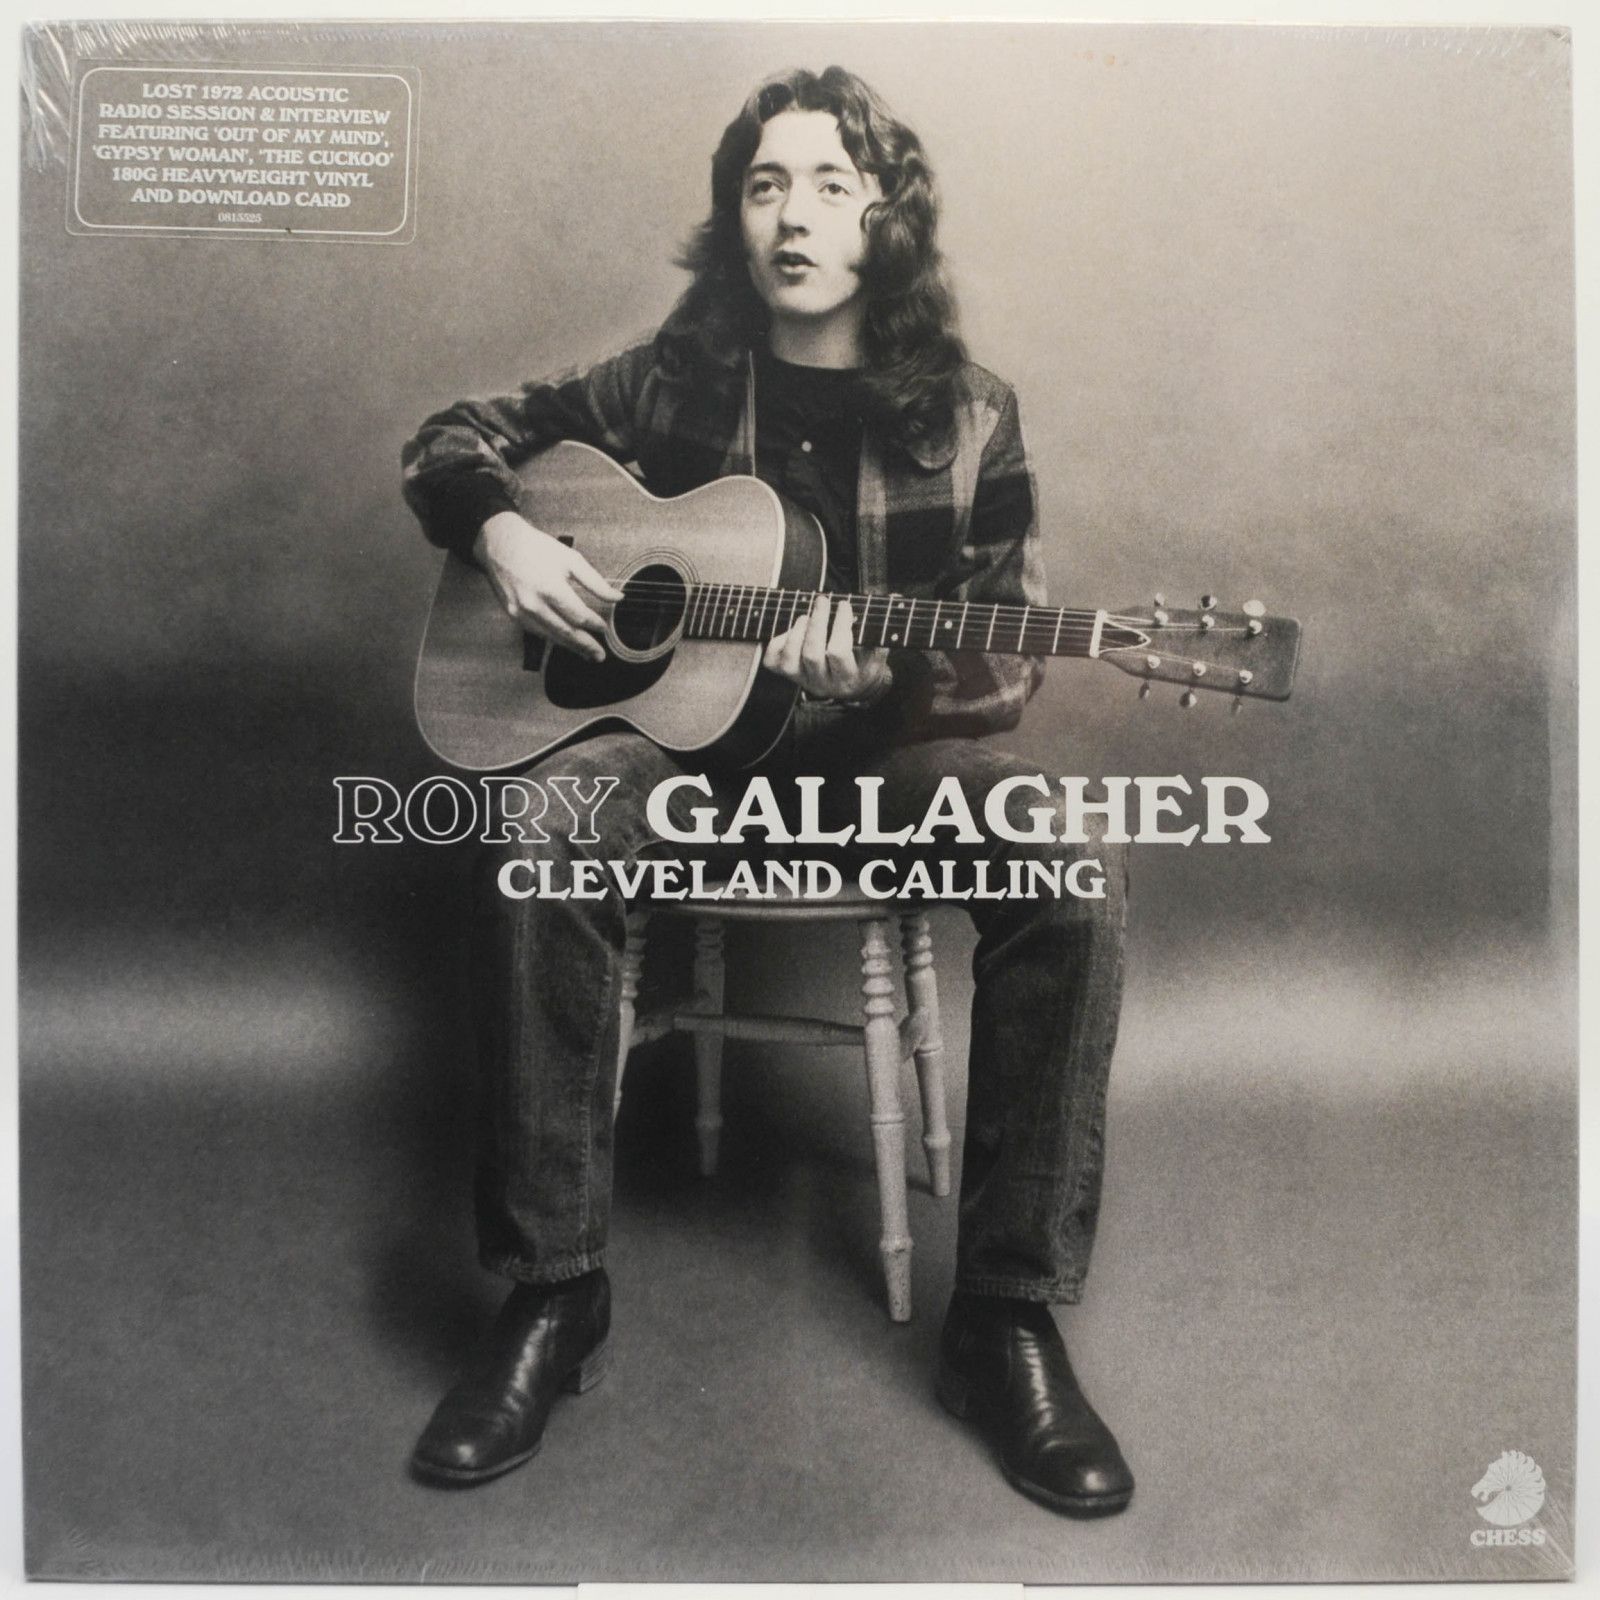 Rory Gallagher — Cleveland Calling, 2020